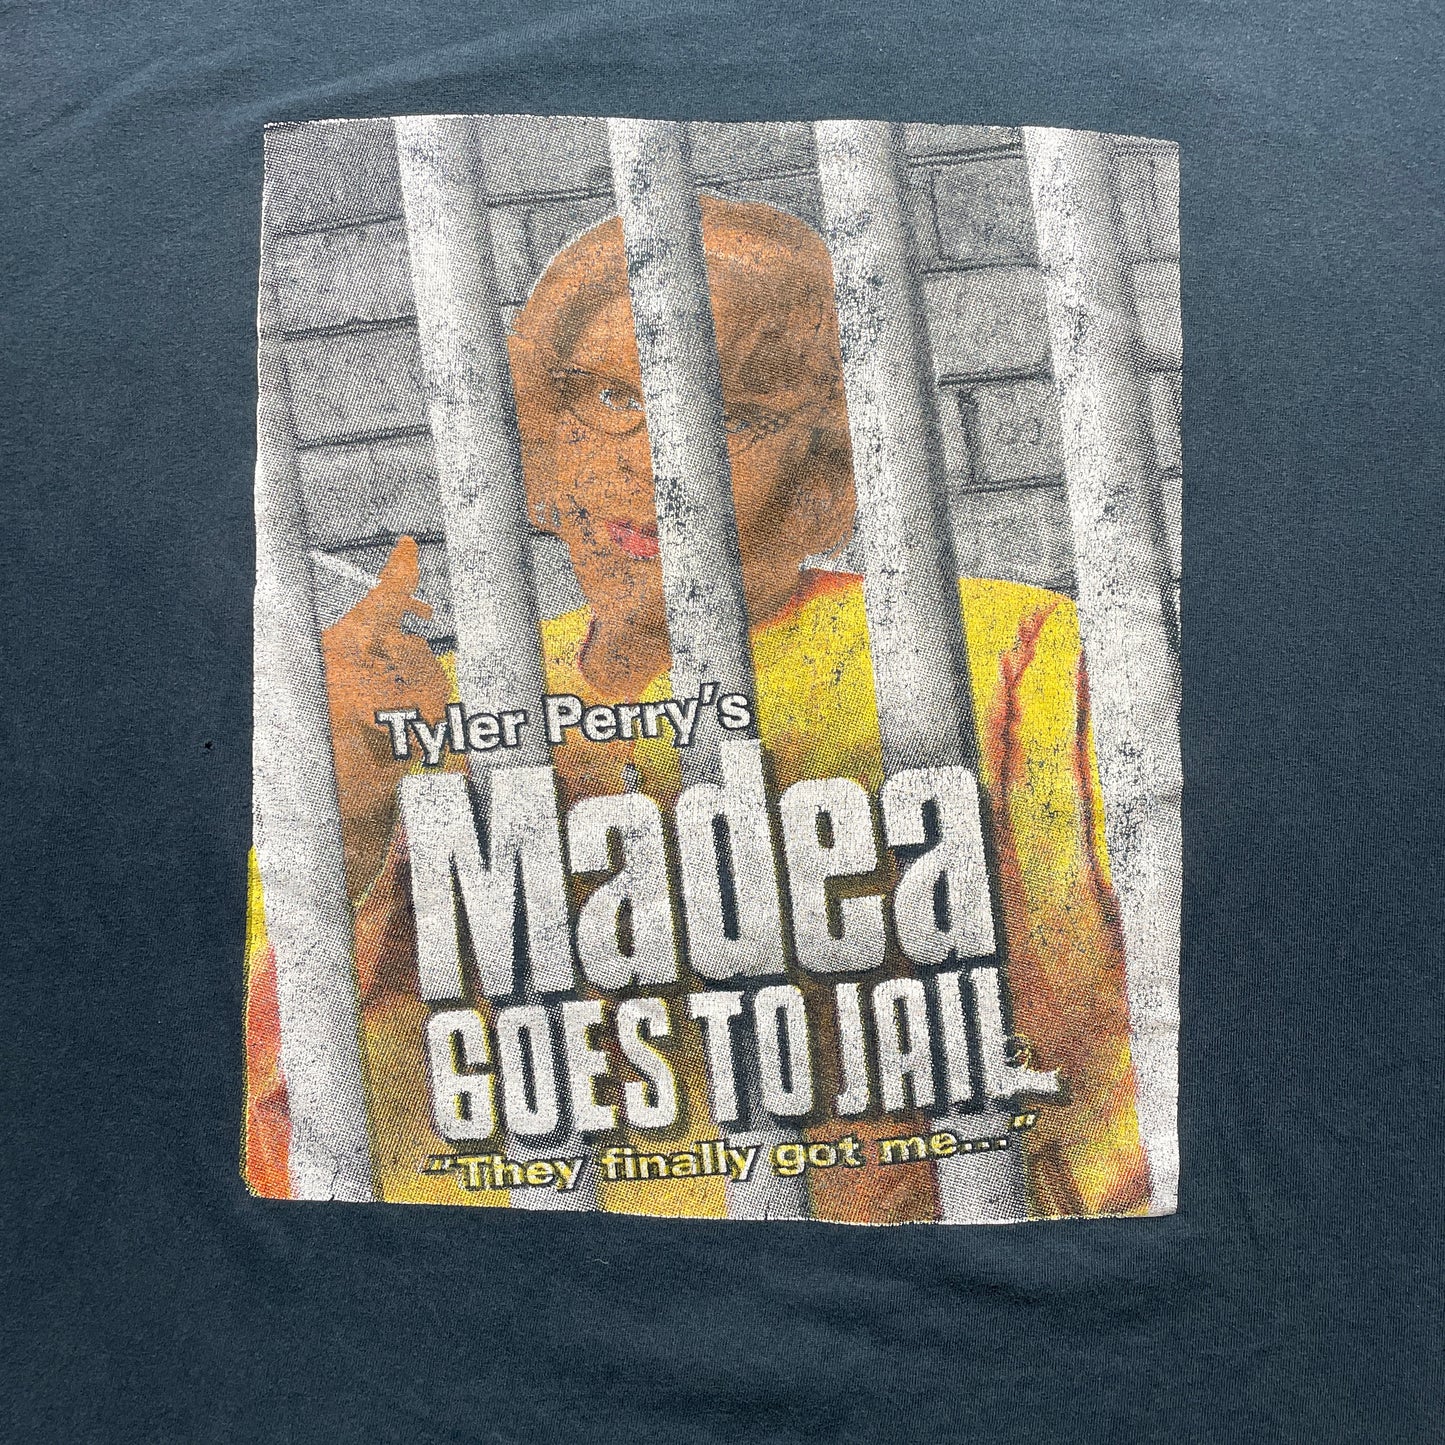 Vintage 2000's Y2K Madea Goes To Jail Tyler Perry Shirt 3XL Oversized